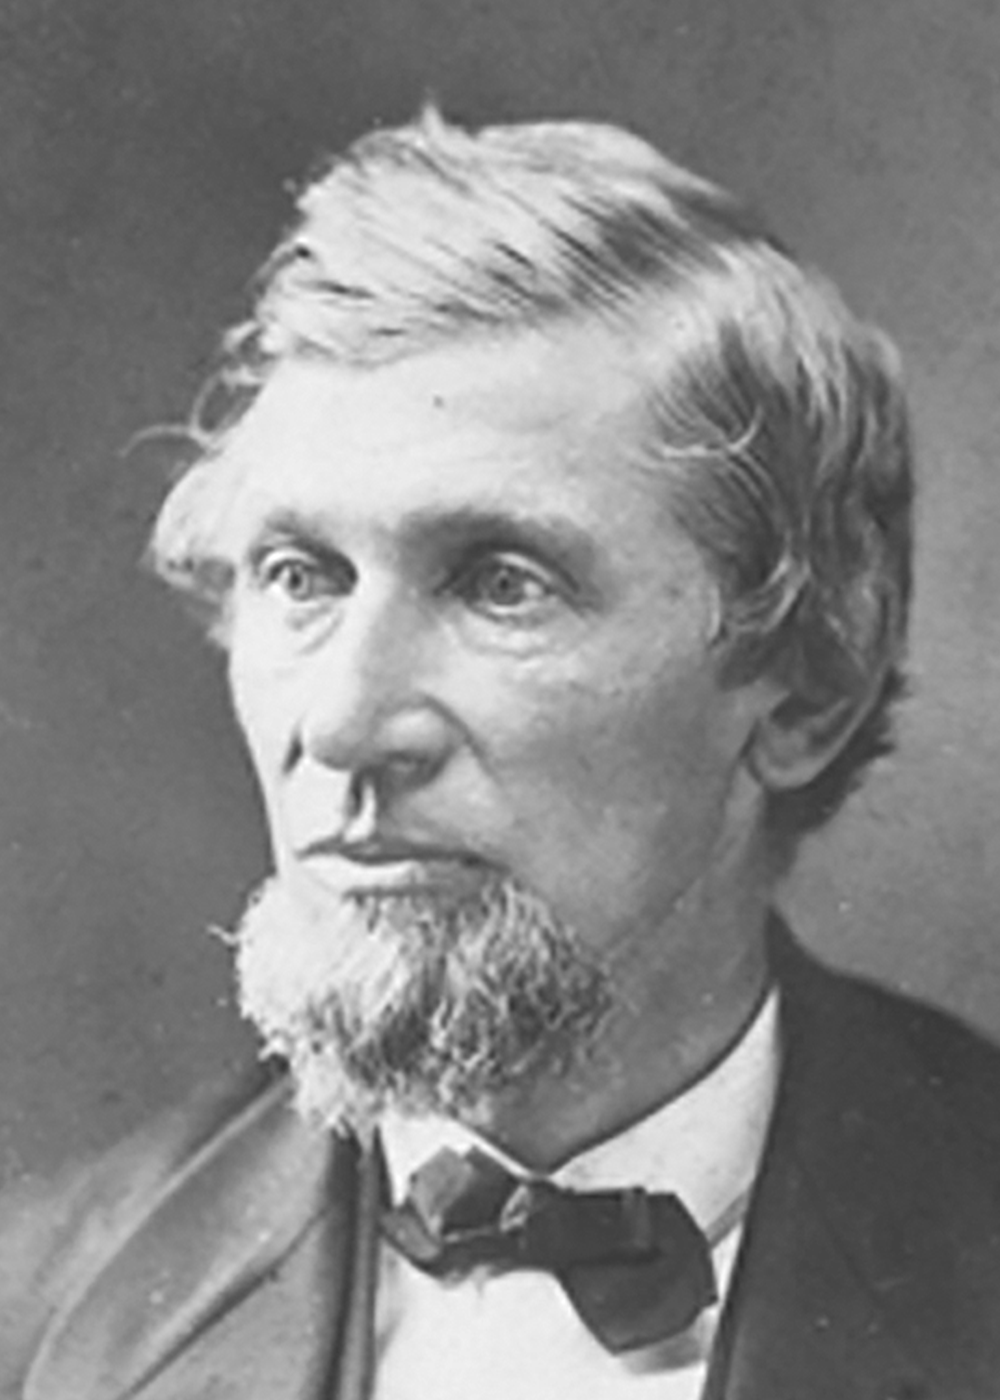 John Milton Gregory, the first regent of the University of Illinois (then called Illinois Industrial University), took a principled stand for inclusion of liberal arts in the curriculum. 